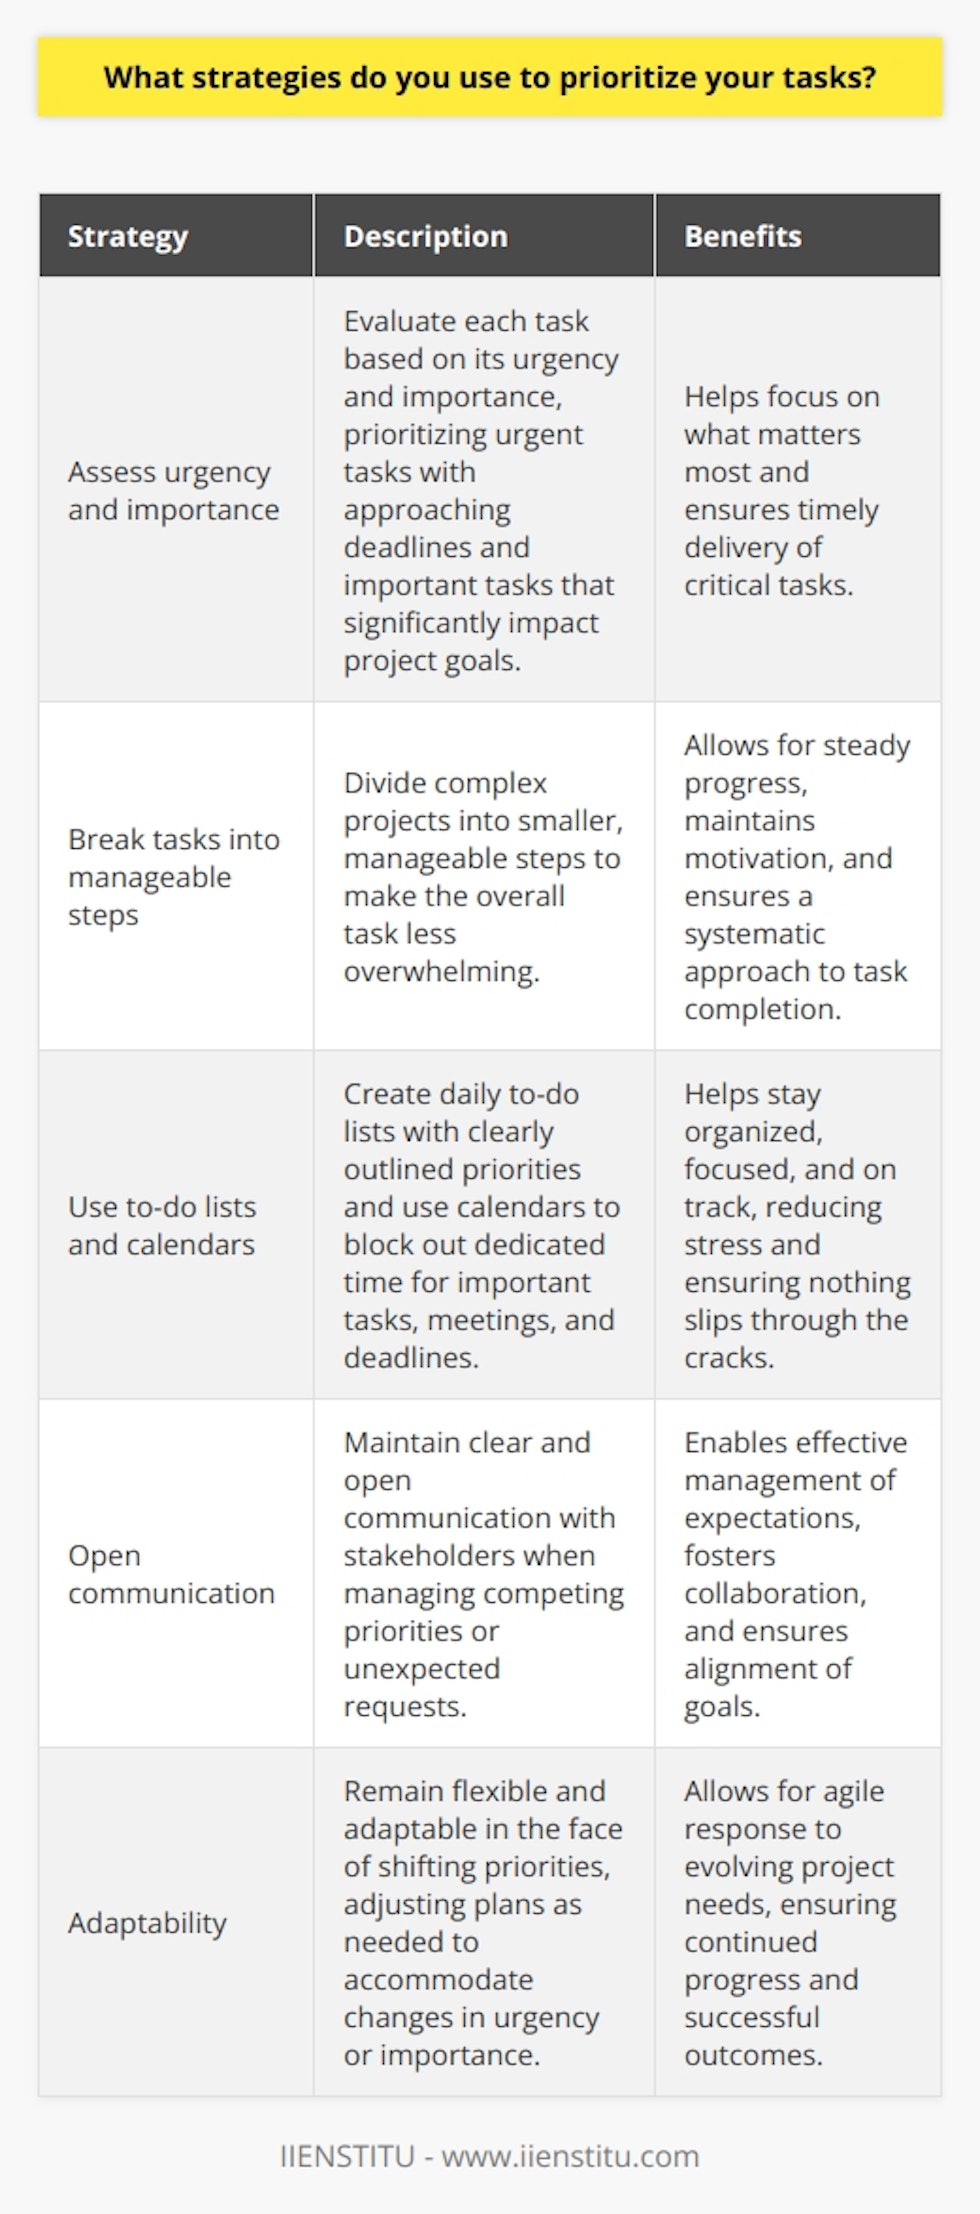 When it comes to prioritizing tasks, I have a few strategies that help me stay organized and productive. 1. Assess urgency and importance First, I evaluate each task based on its urgency and importance. Urgent tasks with approaching deadlines take priority, followed by important tasks that significantly impact project goals. This helps me focus on what matters most. Real-life example: In my previous role, I once had to juggle a tight project deadline and an unexpected client request. By carefully assessing the urgency and importance of each task, I was able to prioritize the deadline first to ensure timely delivery, then shift my attention to the clients needs. Open communication was key in managing expectations on both fronts. 2. Break tasks into manageable steps When facing a complex project, I break it down into smaller, manageable steps. This makes the overall task less overwhelming and allows me to tackle it piece by piece, ensuring steady progress and maintaining motivation along the way. 3. Use to-do lists and calendars Im a big believer in the power of to-do lists and calendars. Each day, I create a to-do list with my priorities clearly outlined. I also use my calendar to block out dedicated time for important tasks, meetings, and deadlines. These tools help me stay organized and on track. Personal insight: I find that writing down my tasks and priorities helps clear my mind and reduces stress. Seeing everything laid out visually makes it easier to focus on what needs to be done and ensures nothing slips through the cracks. By combining these strategies - assessing urgency and importance, breaking tasks into steps, and using to-do lists and calendars - Im able to effectively prioritize my workload and consistently meet deadlines. Its all about staying organized, focused, and adaptable in the face of shifting priorities.